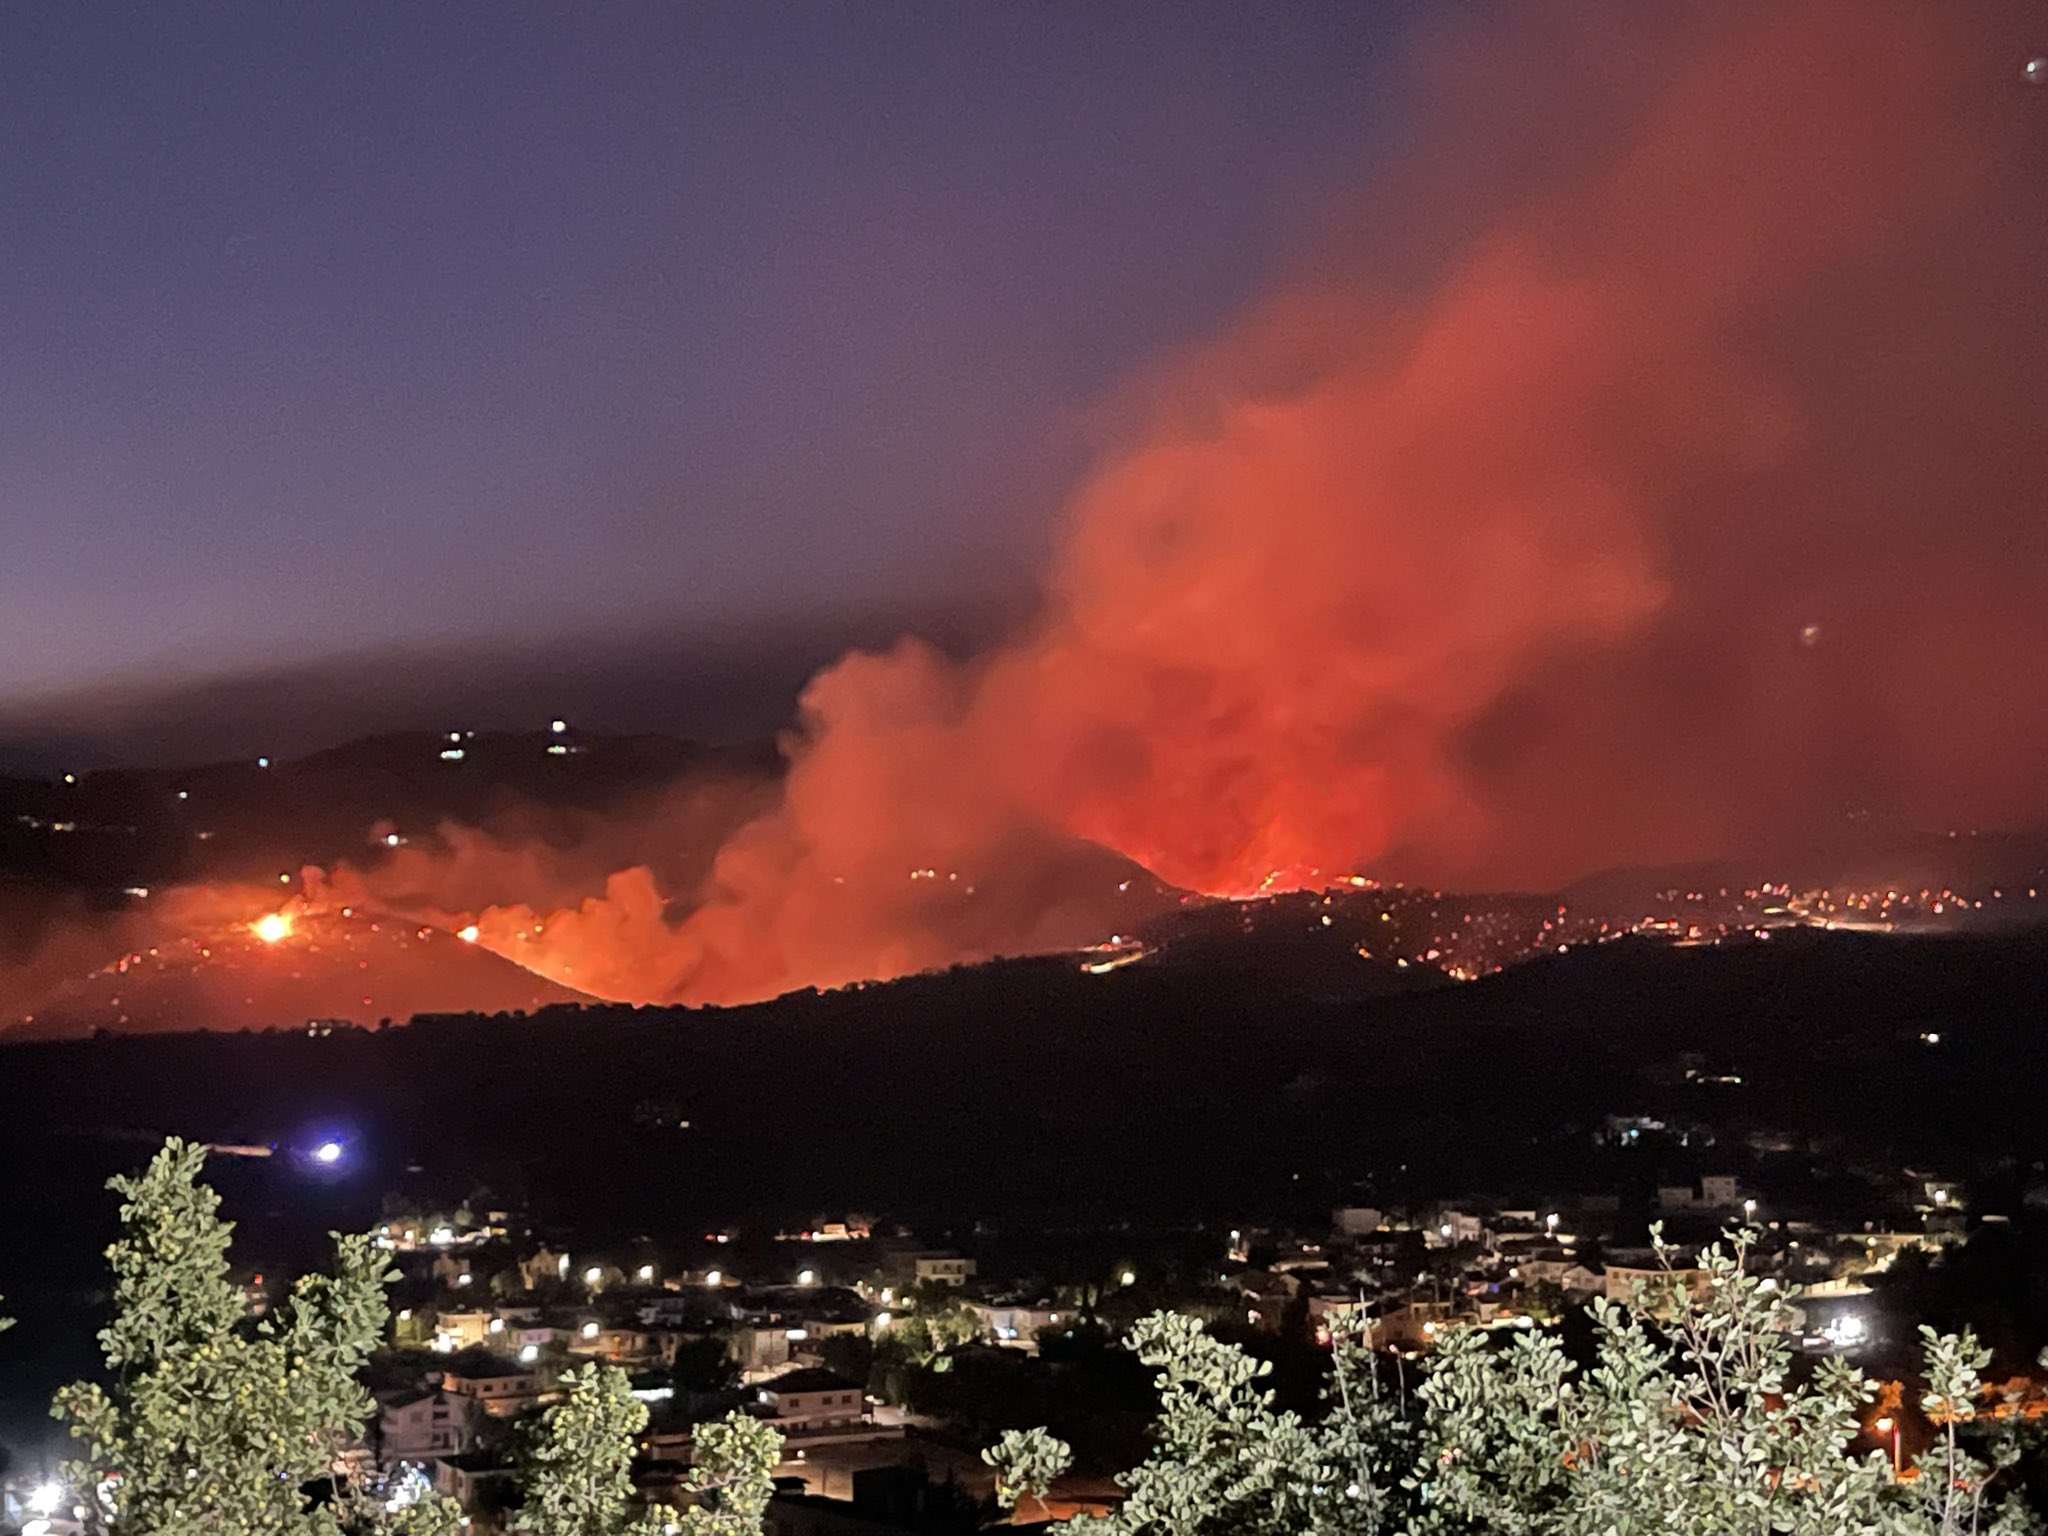 Total of 41 wildfires erupt in Greece over past 24 hours; none evolve into major blazes